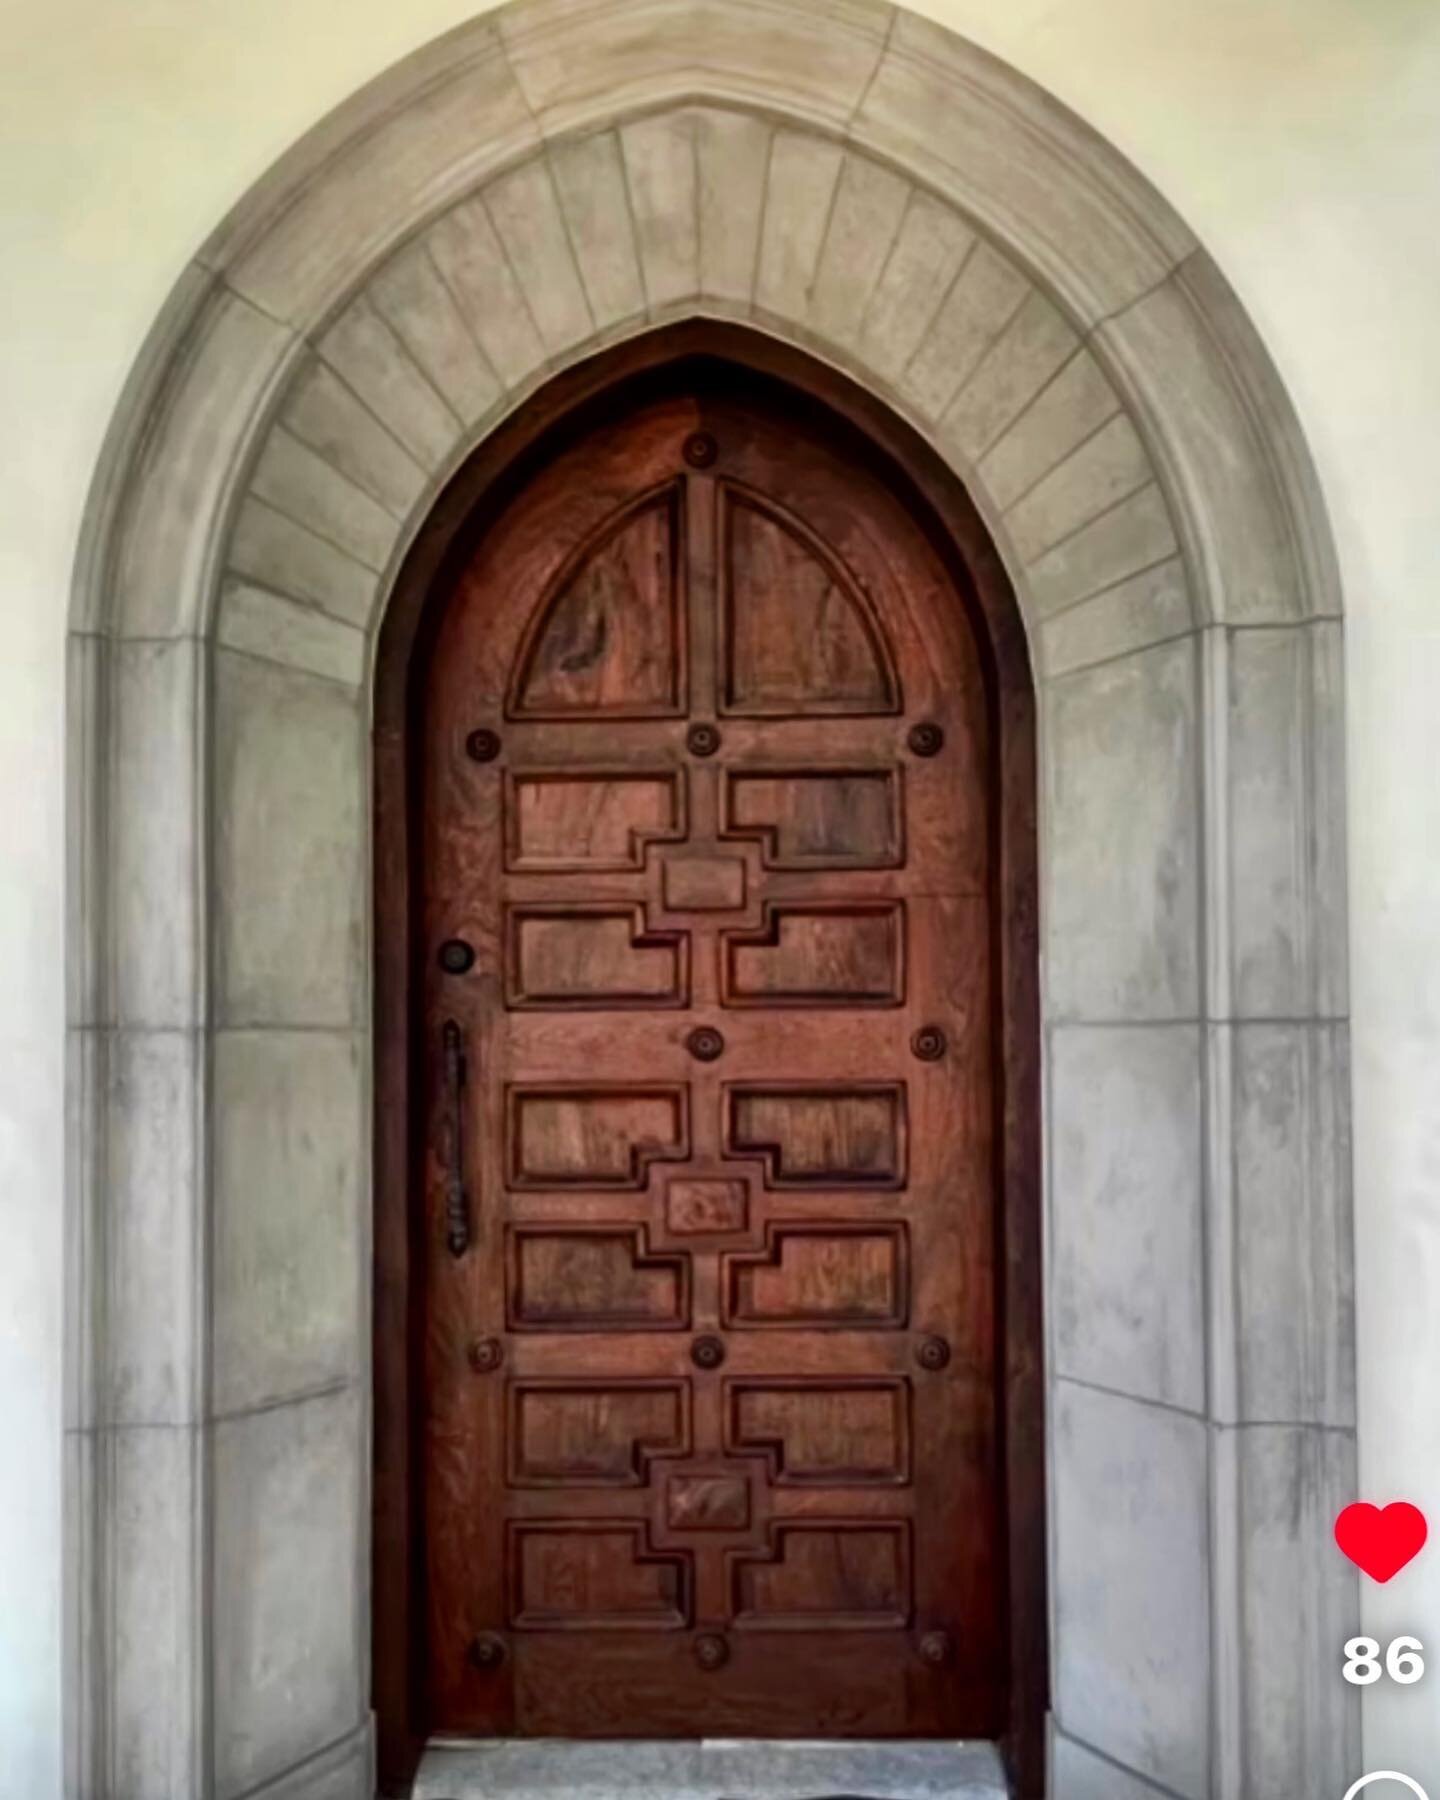 A cathedral arched door we crafted for @buildpatriot for a beautiful home in Coronado.
#customdoors #cathedralarch #wooddoors #coronado #architecture #beautifulhomes #homebuilder #exteriordesign